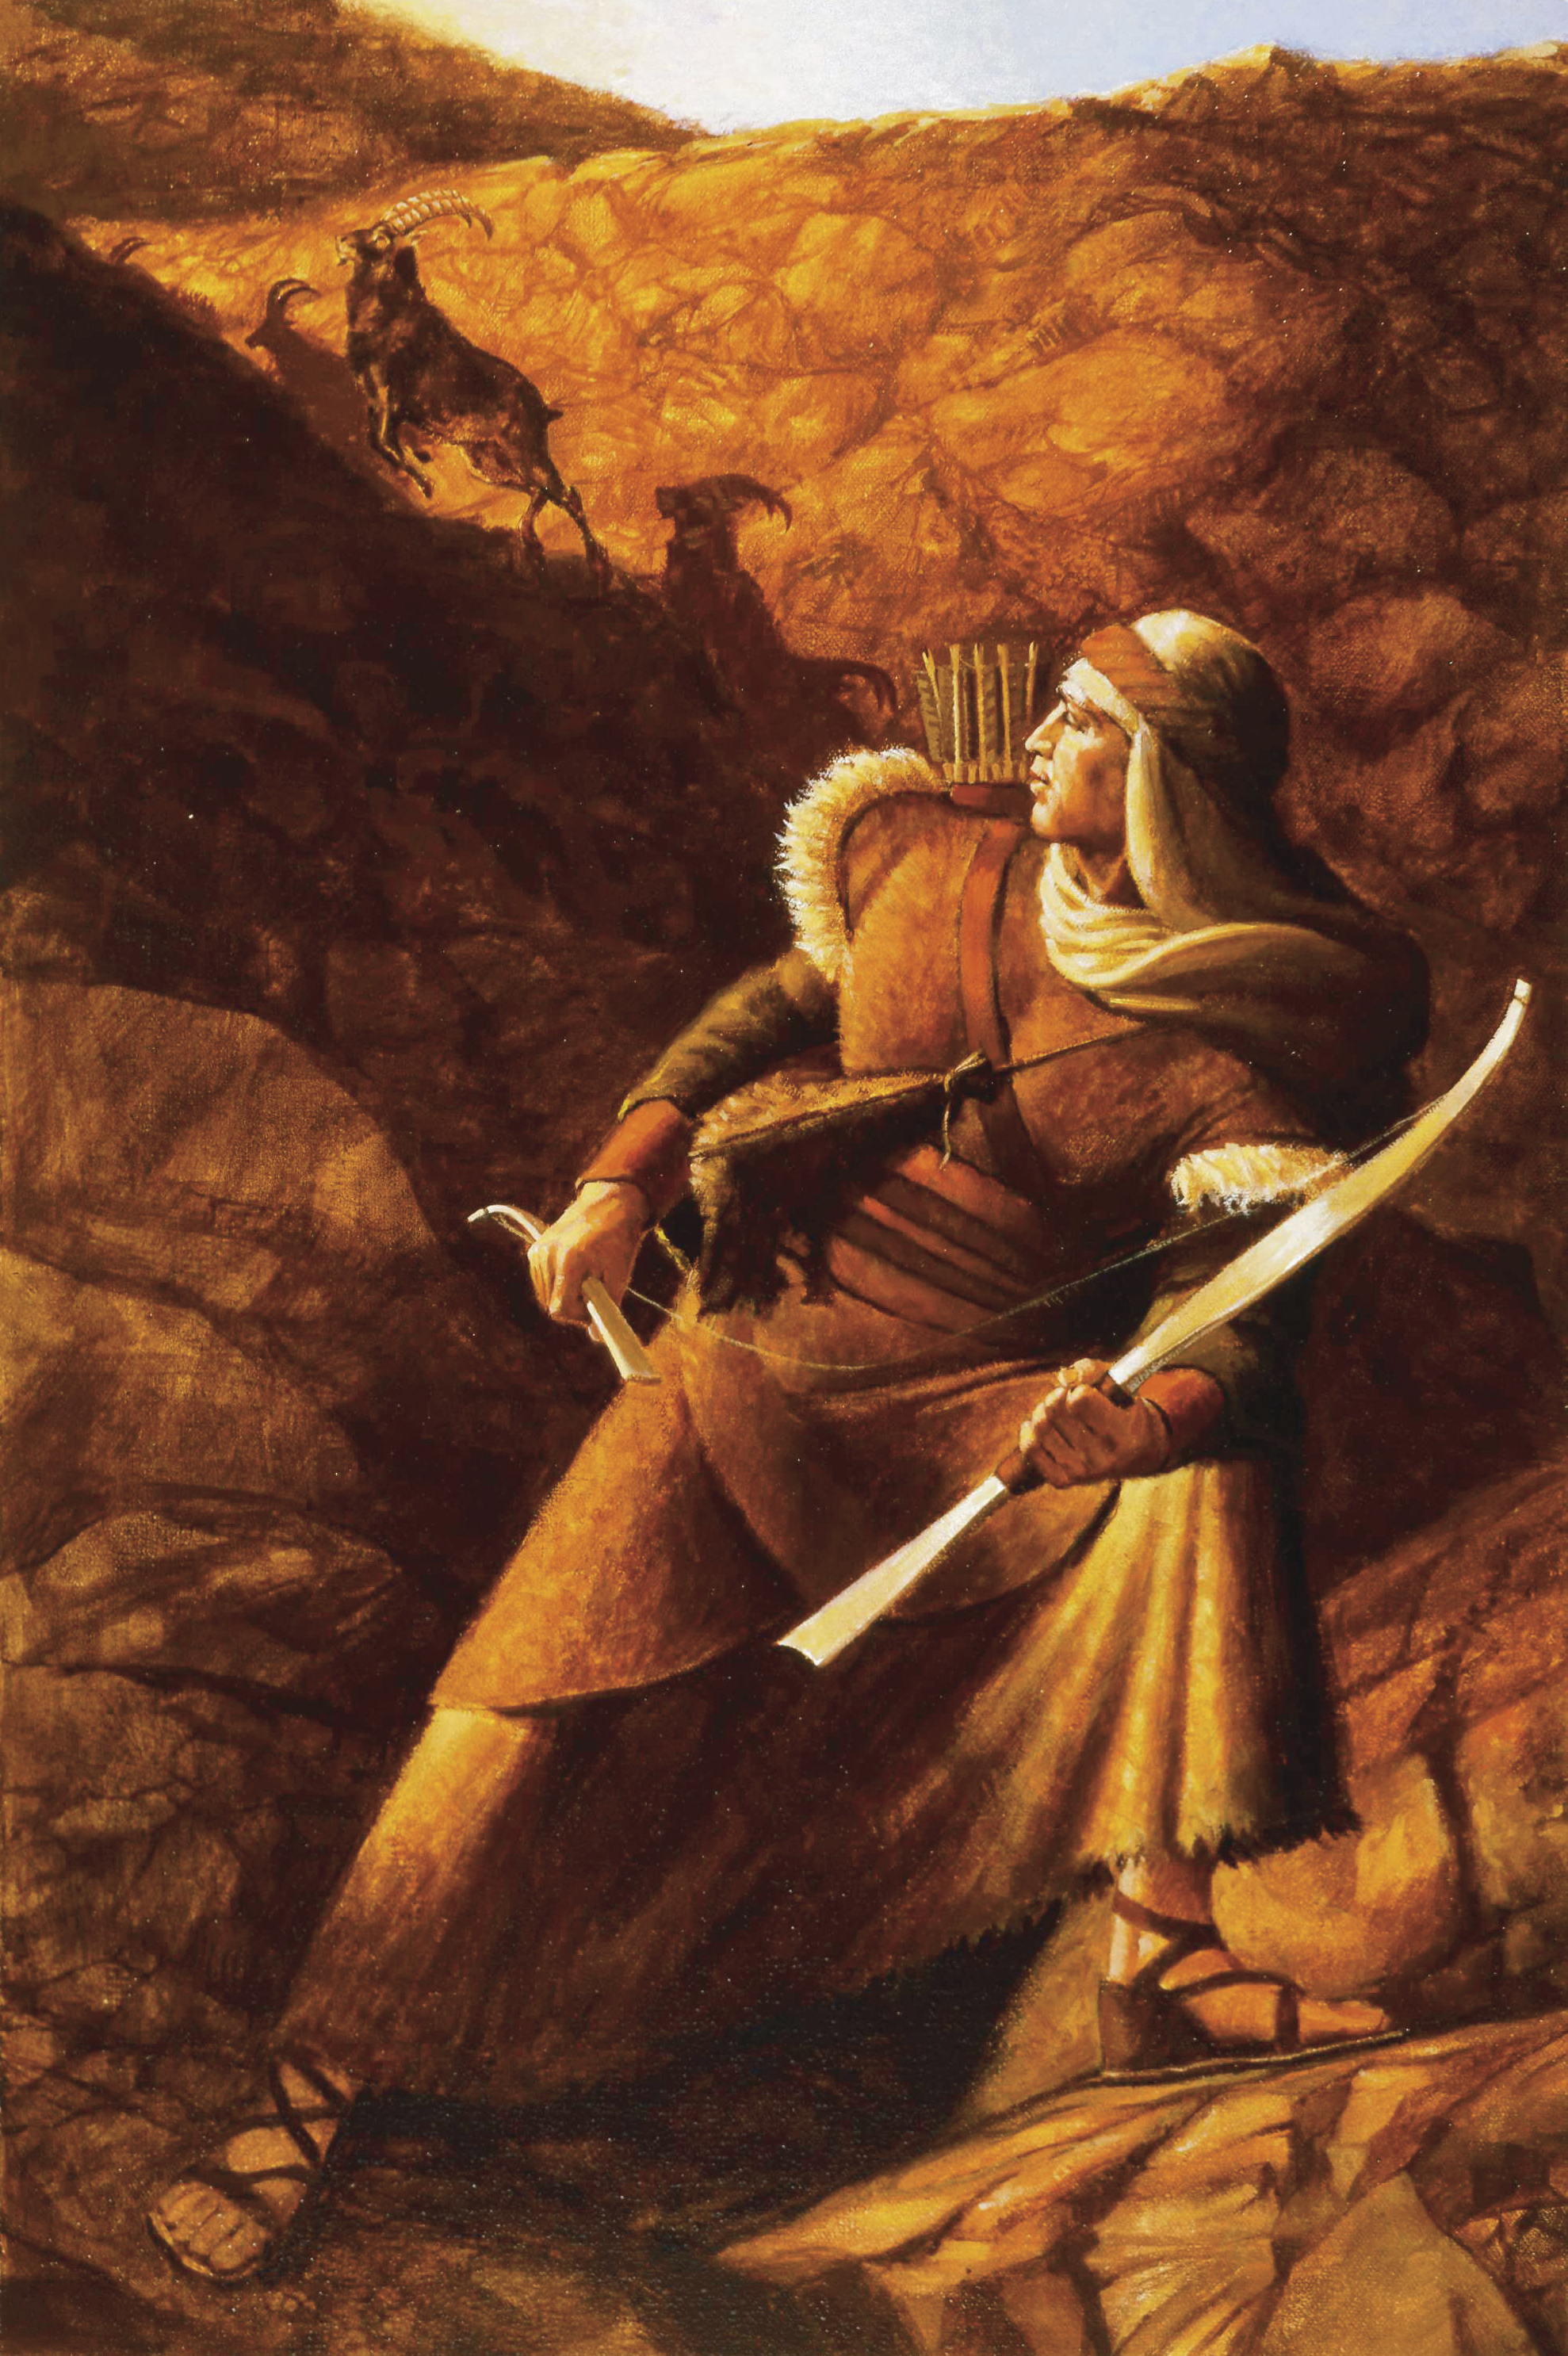 Nephi’s Broken Bow, by Michael Jarvis Nelson